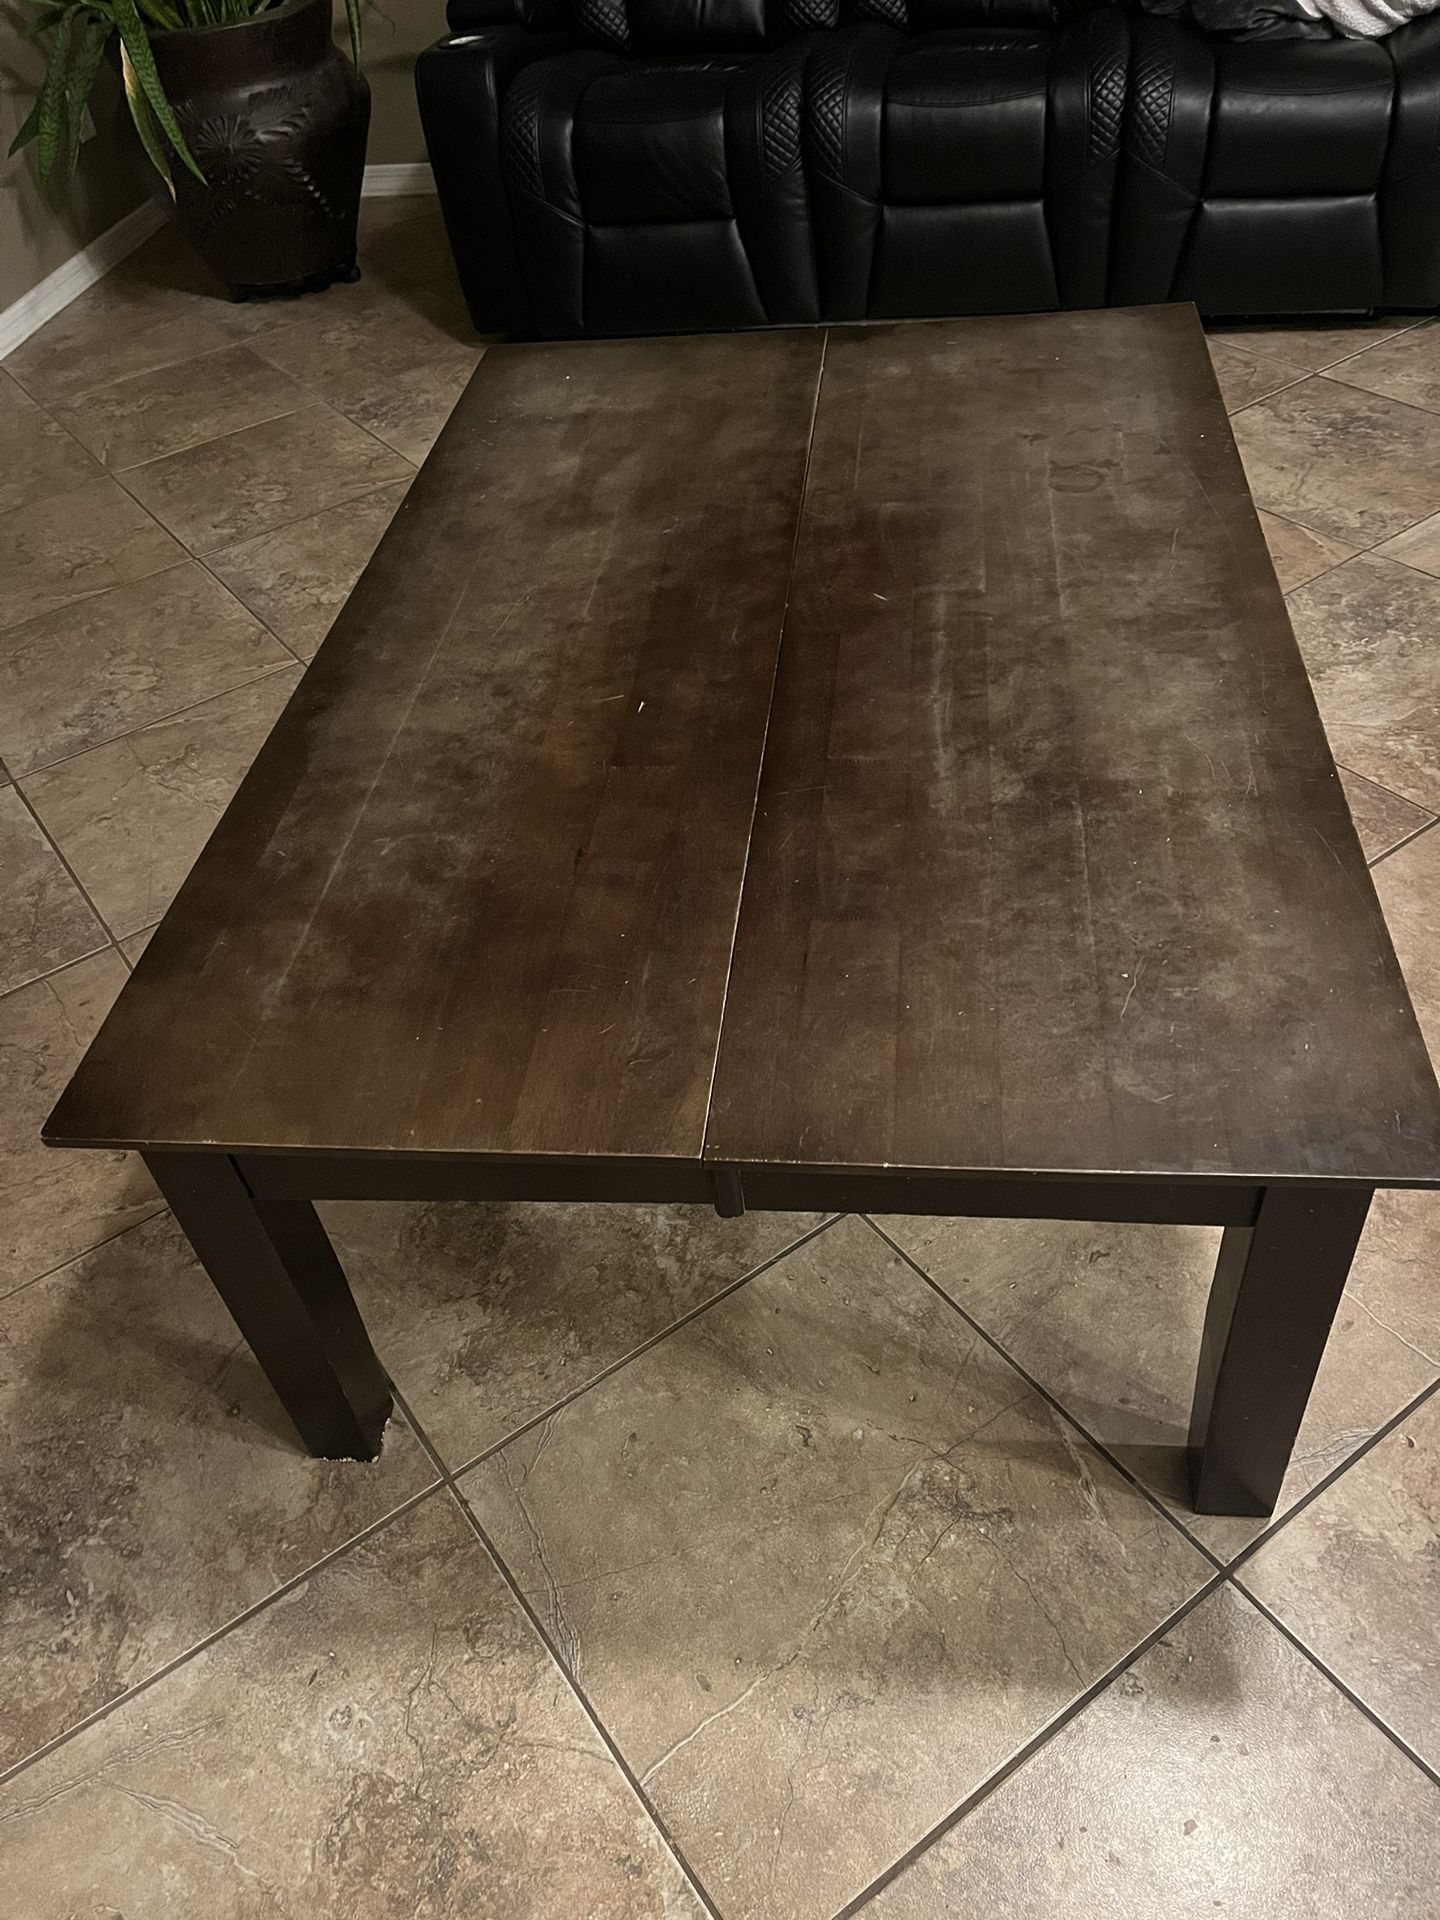 Large Ugly Rustic Table